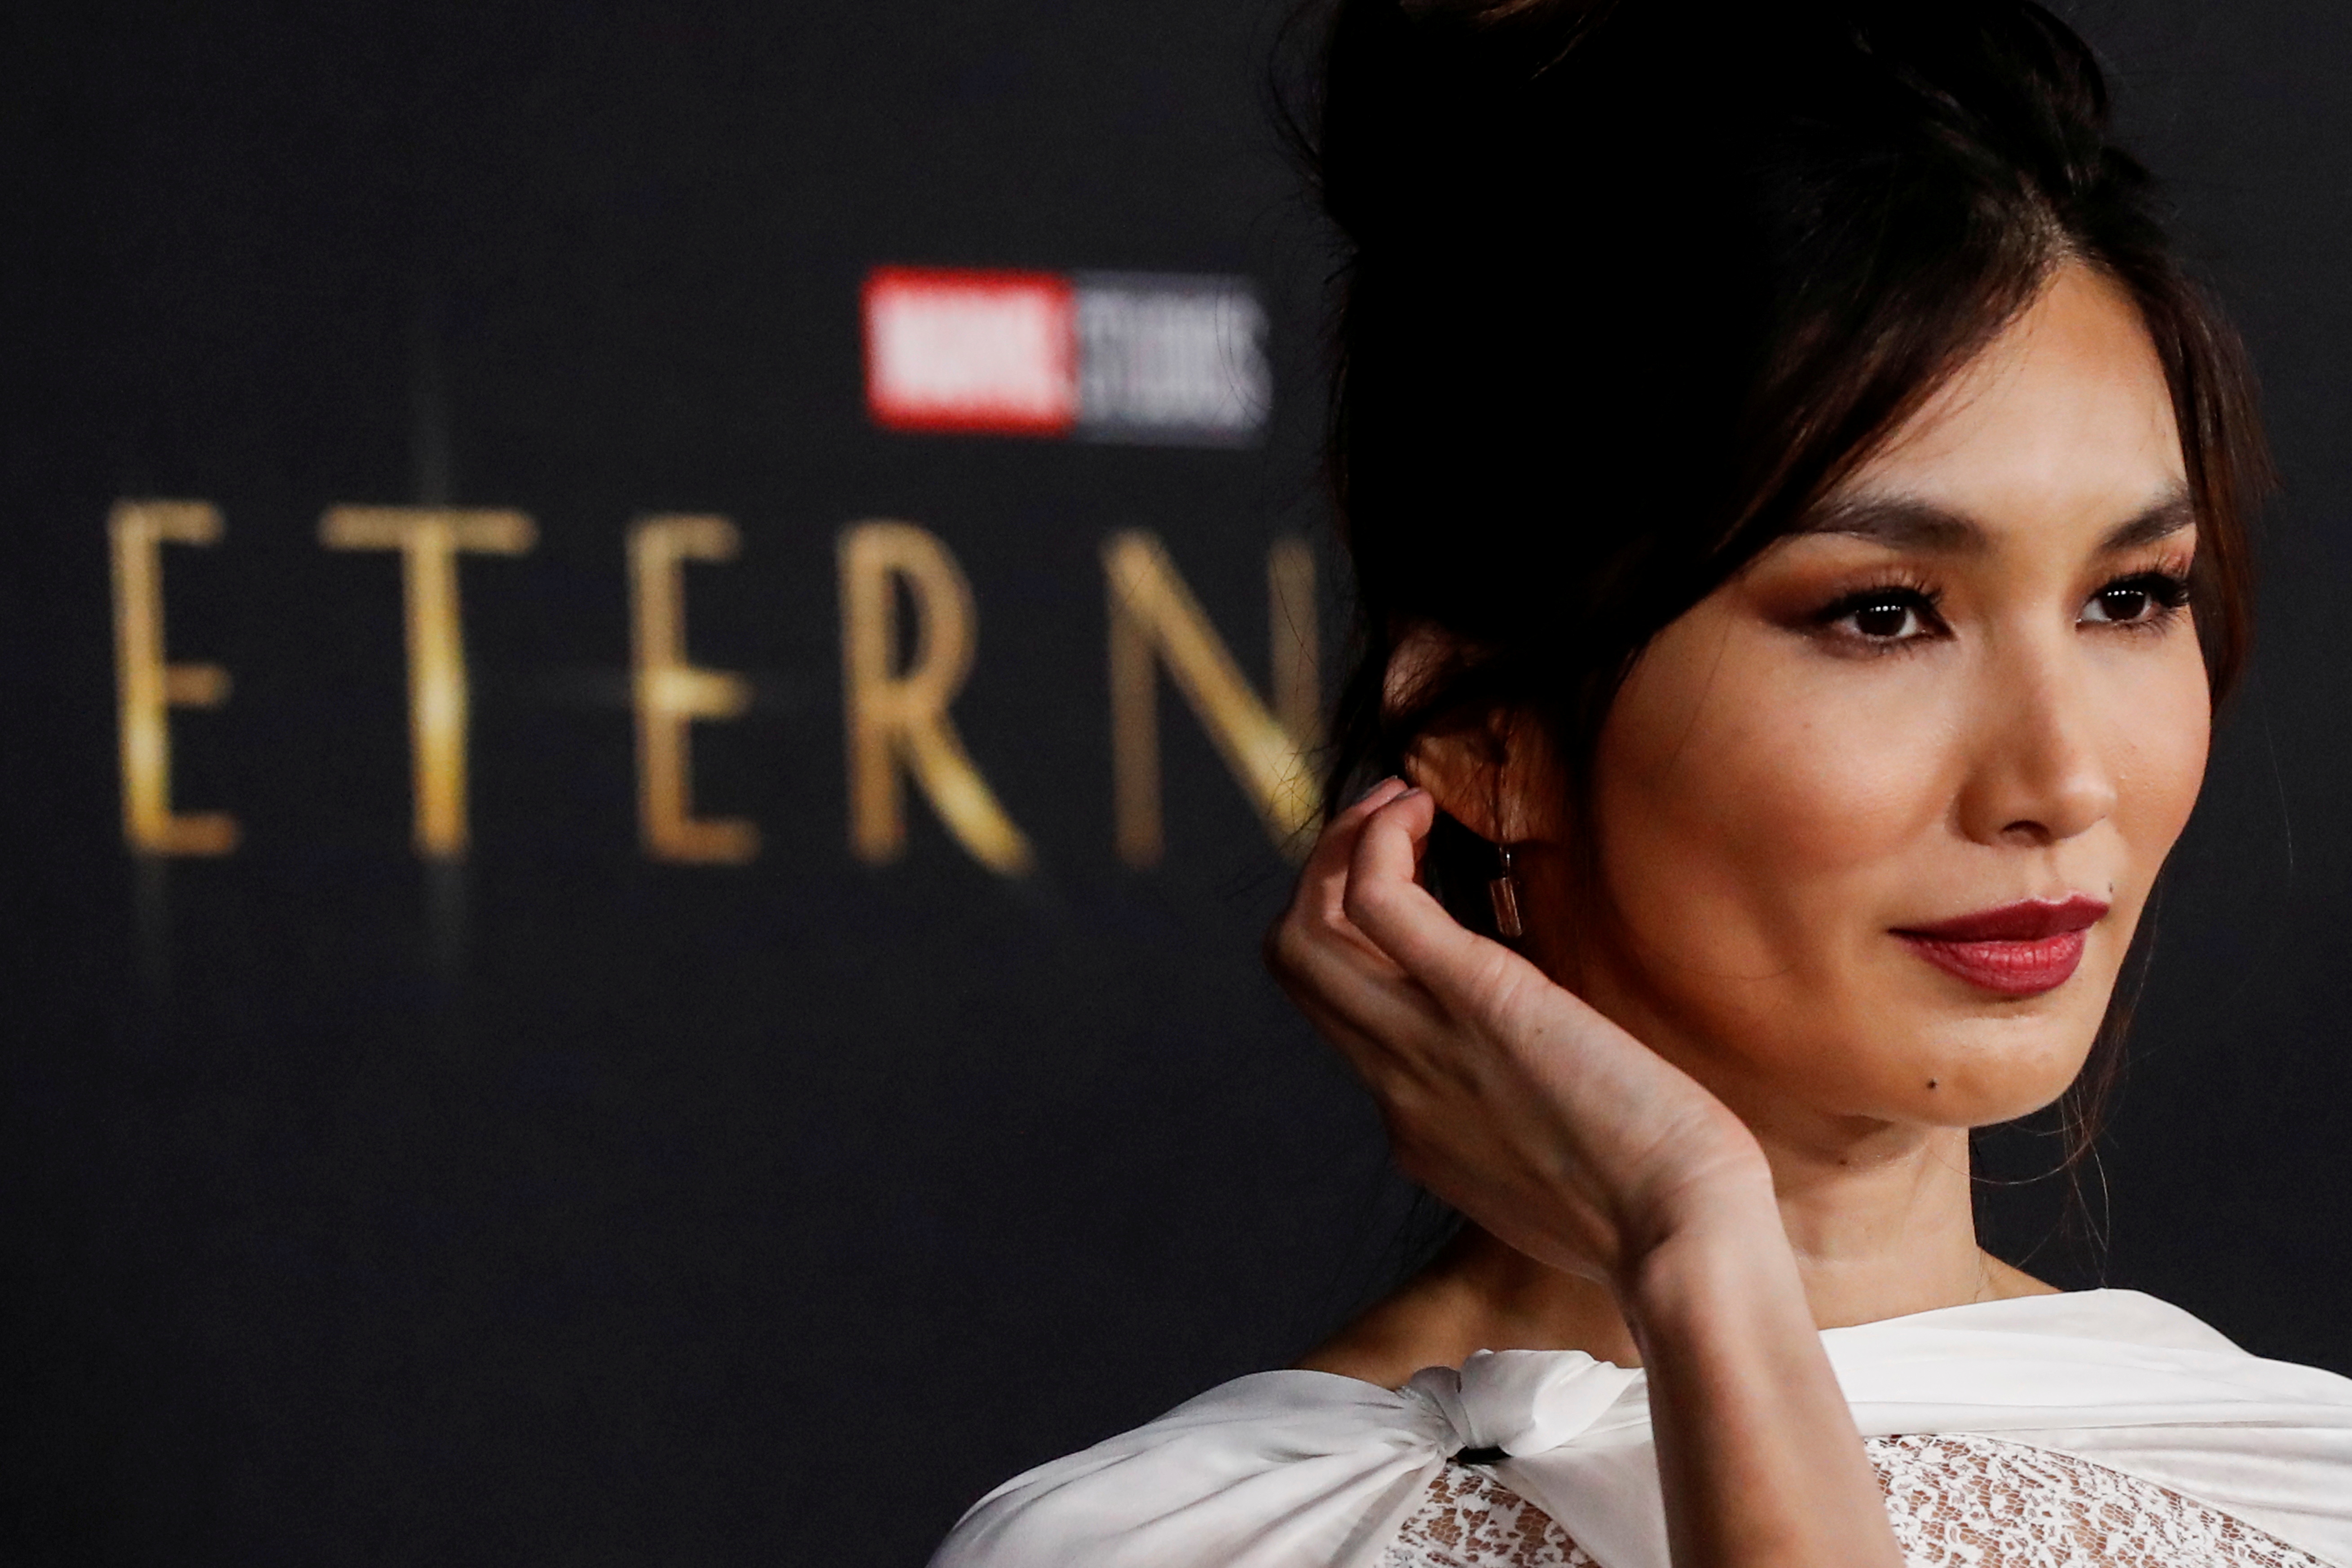 Cast member Gemma Chan poses at the premiere for the film 